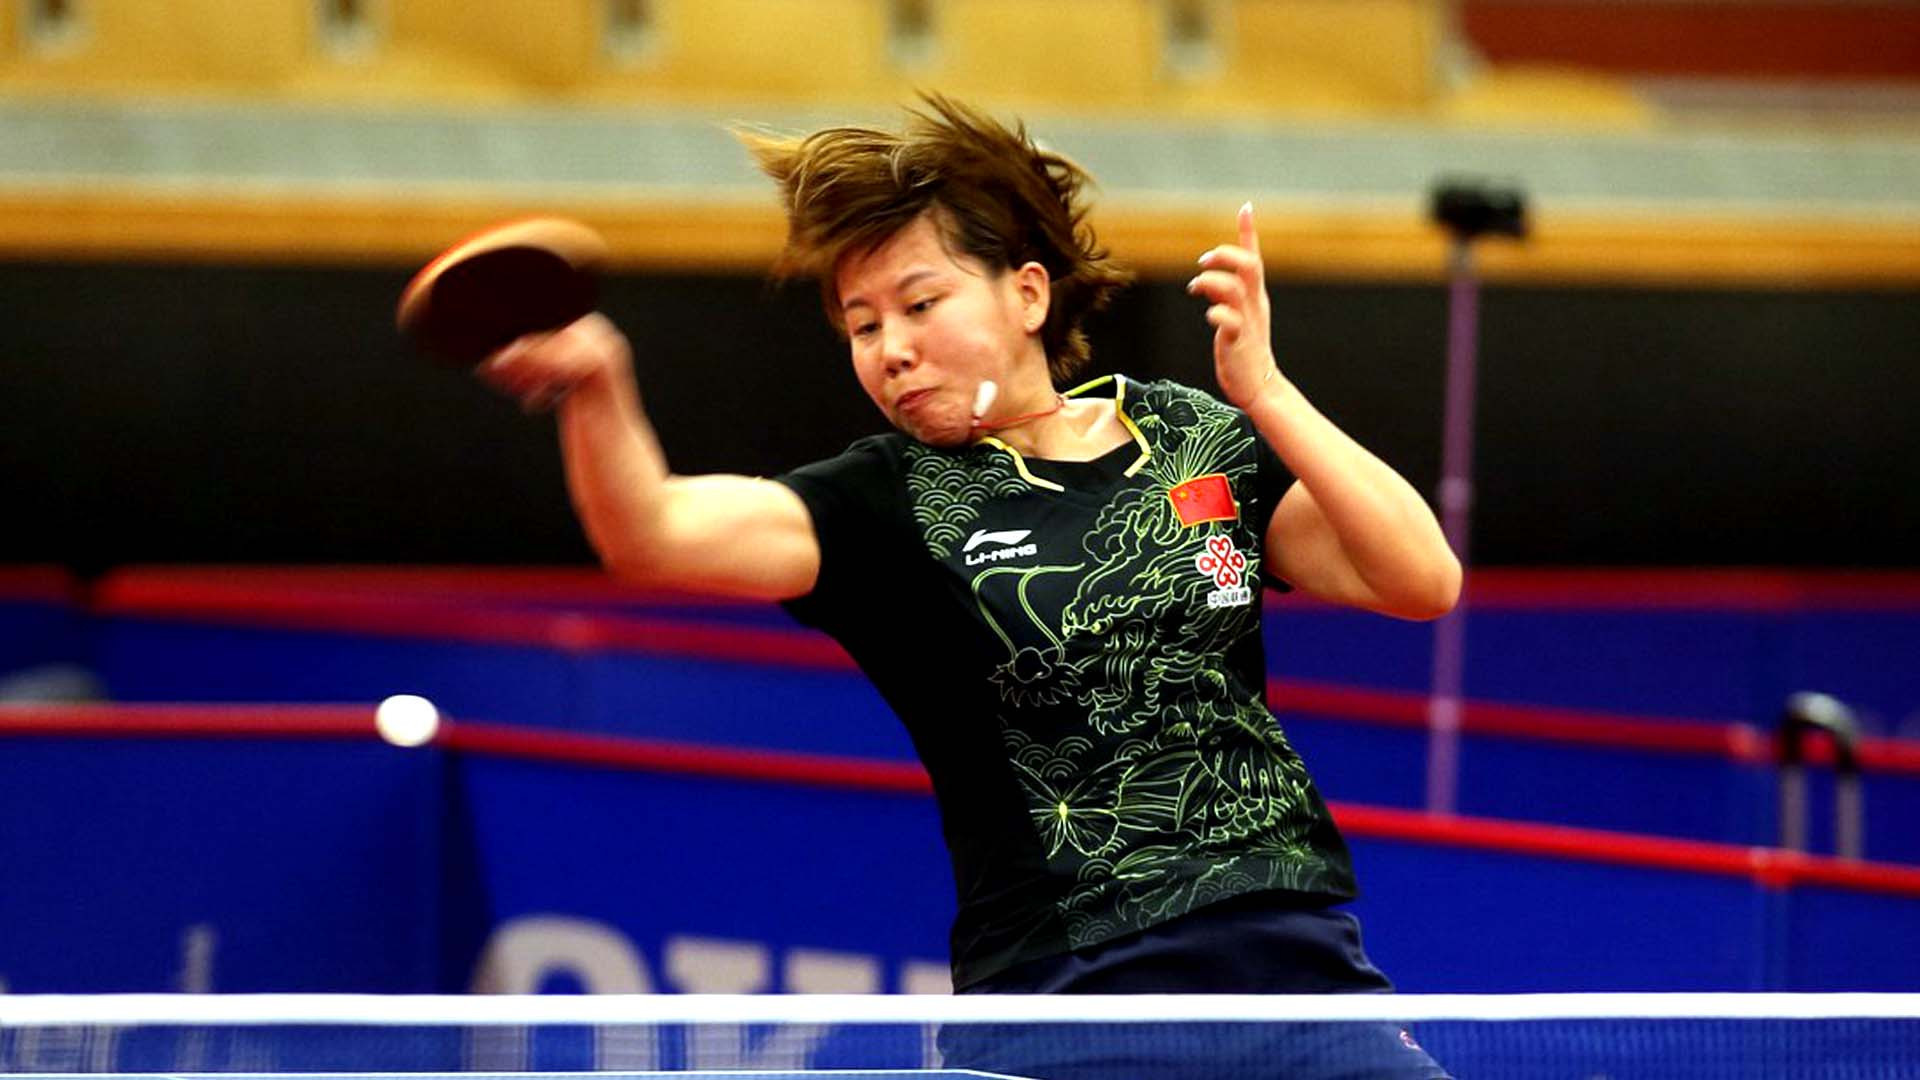 Qualifer to face world and Olympic champion in ITTF Swedish Open final